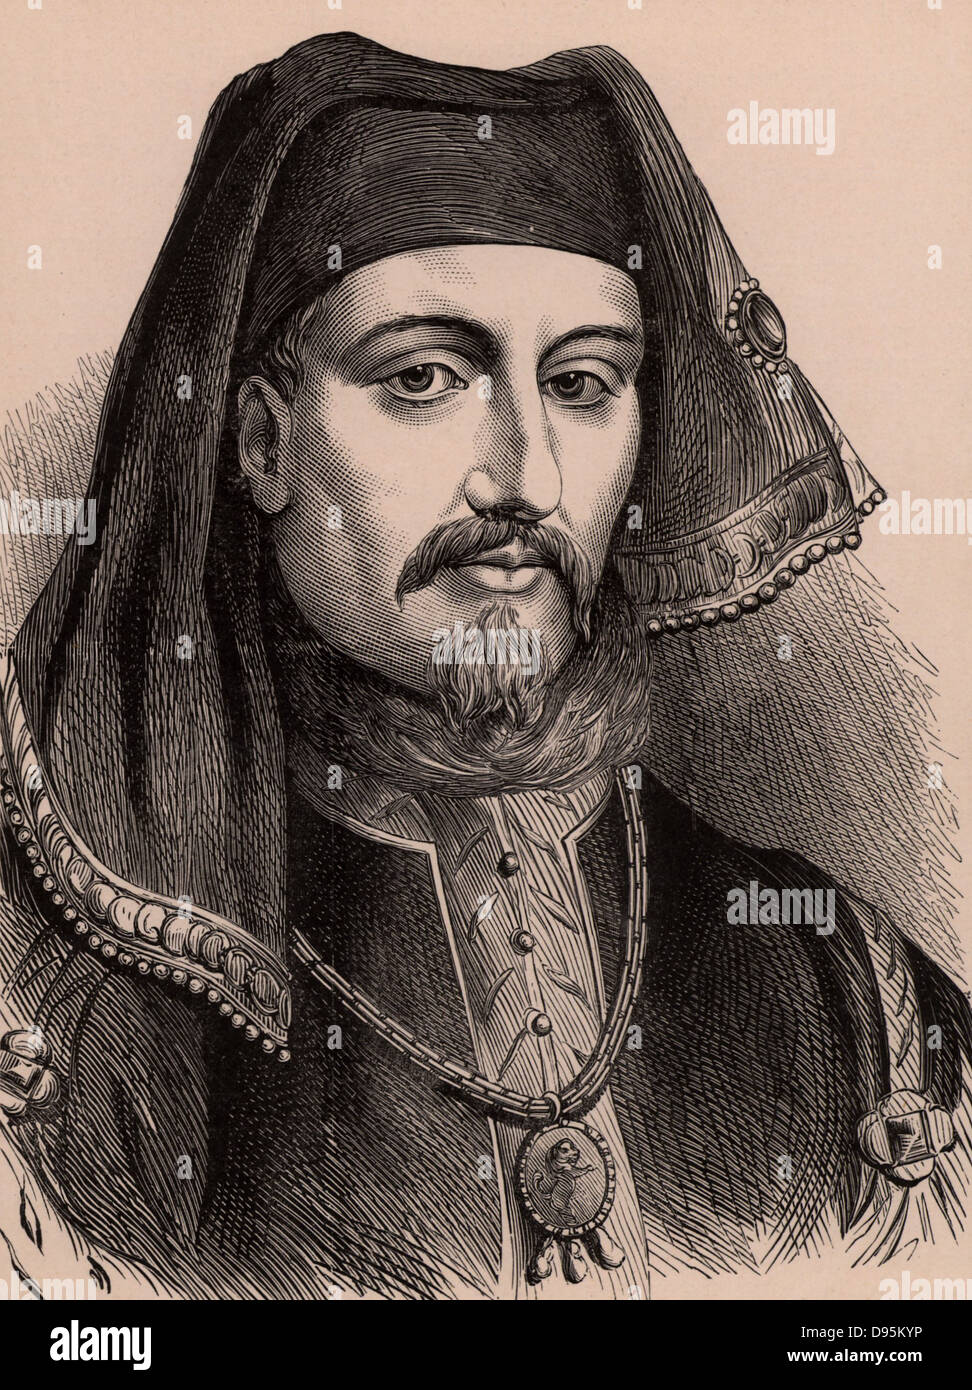 Henry IV (1367-1413) king of England from 1399. First Lancastrian king of England, son of John of Gaunt. Wood engraving c1900. Stock Photo